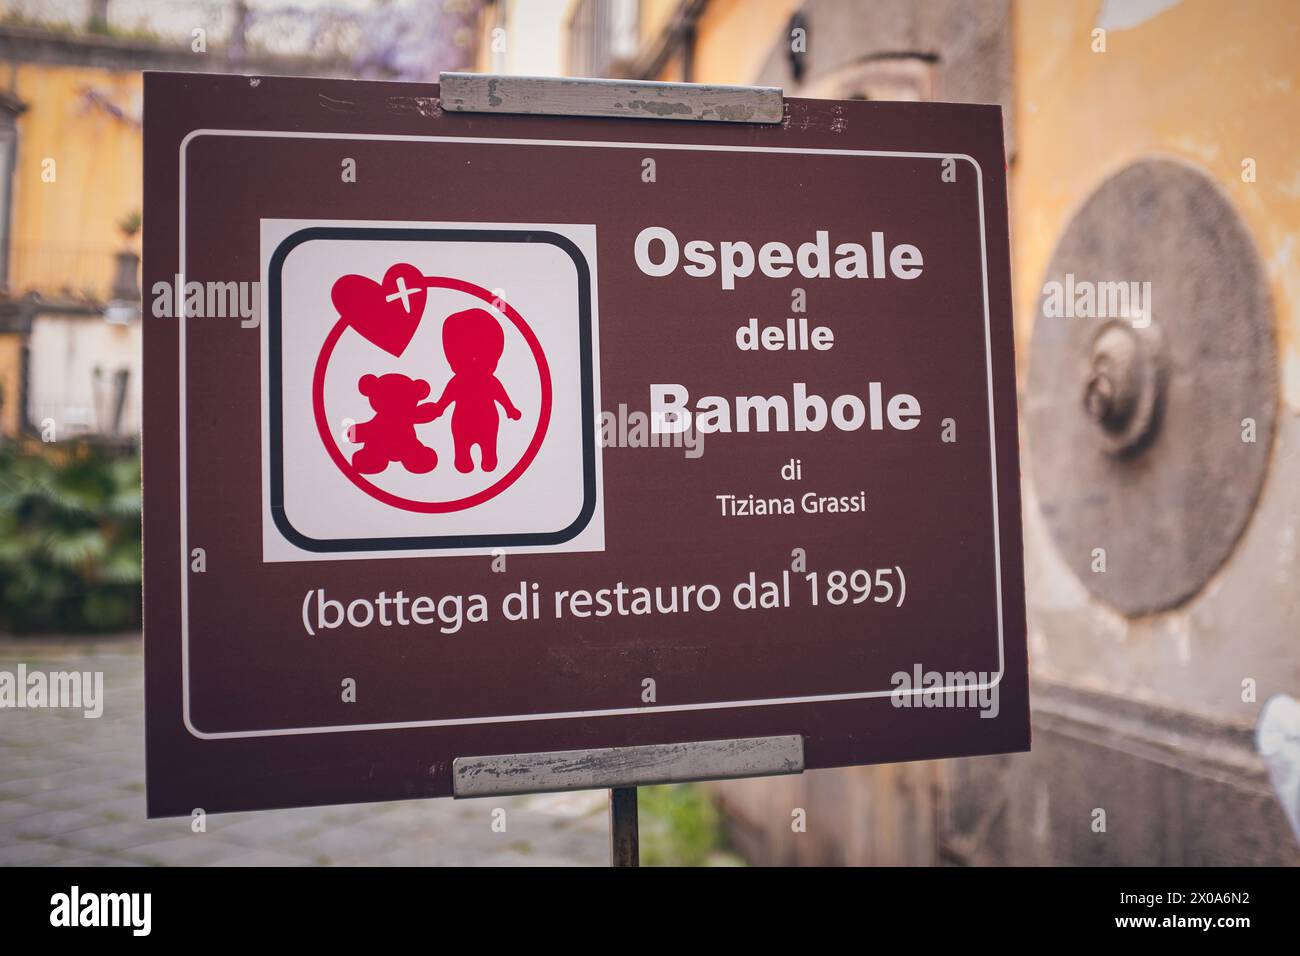 Ospedale delle Bambole in the city of Naples, Italy. Stock Photo